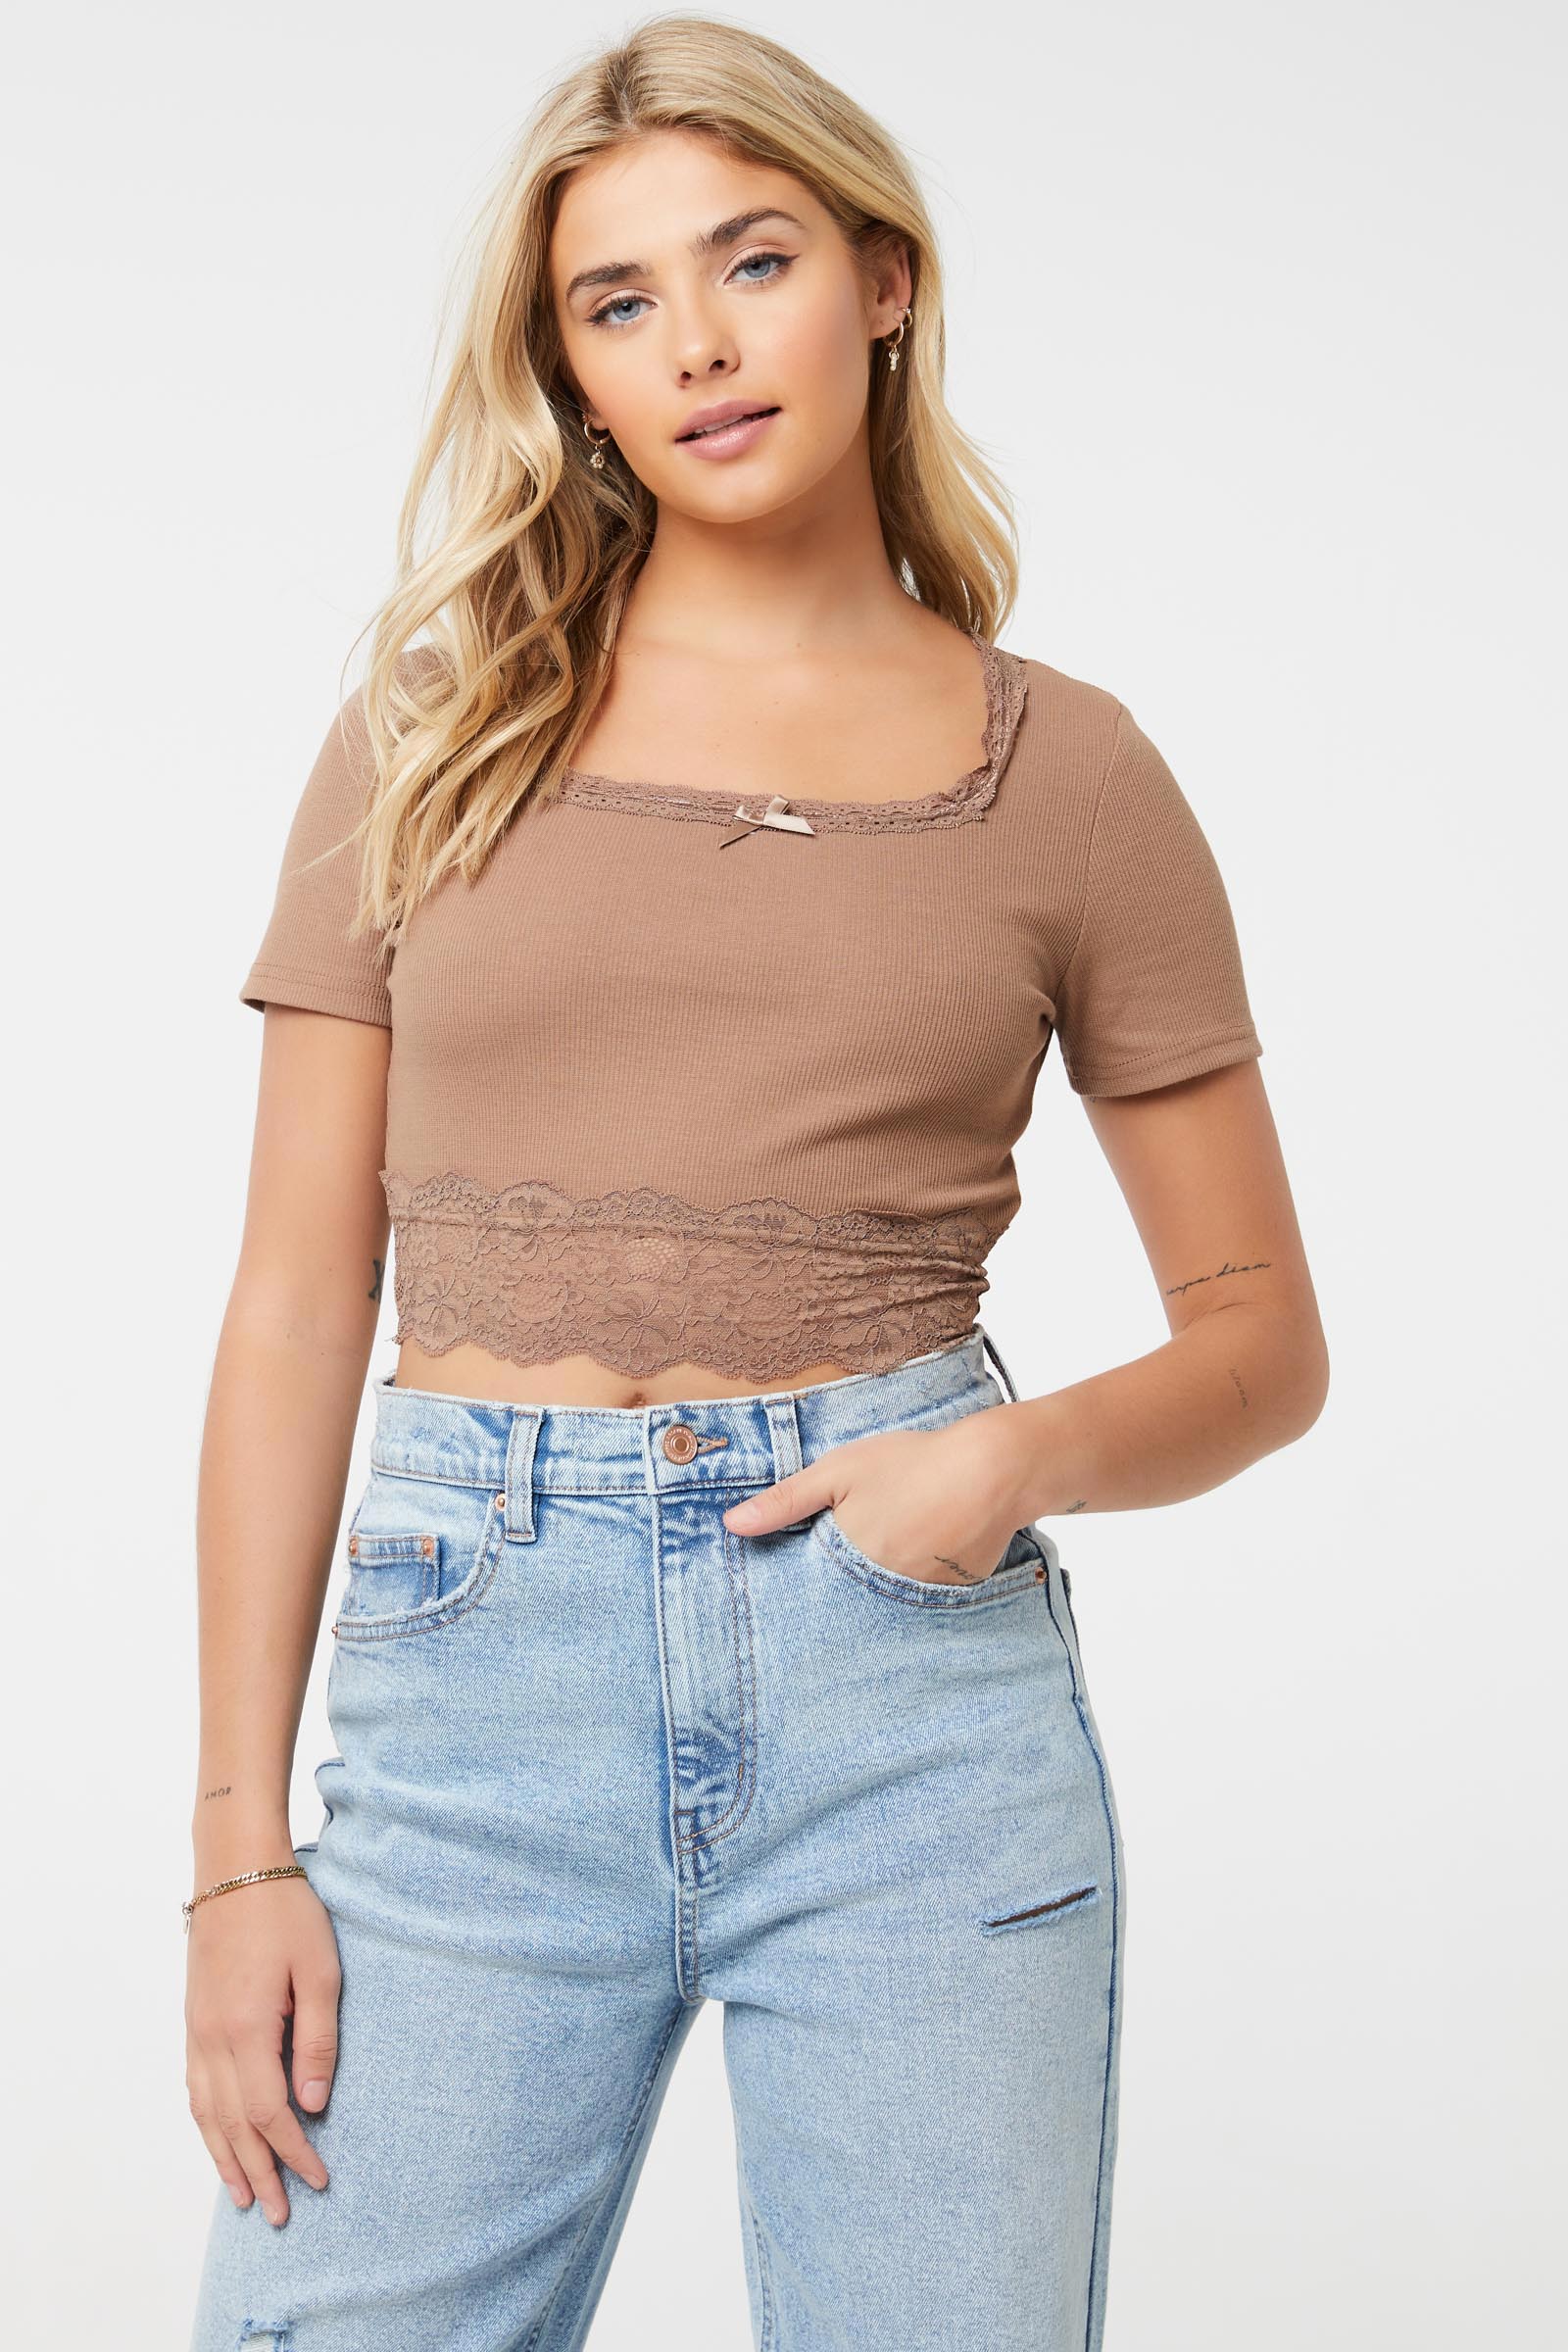 Ardene Crop Square Neck Tee with Lace Hem in Beige | Size Small | Polyester